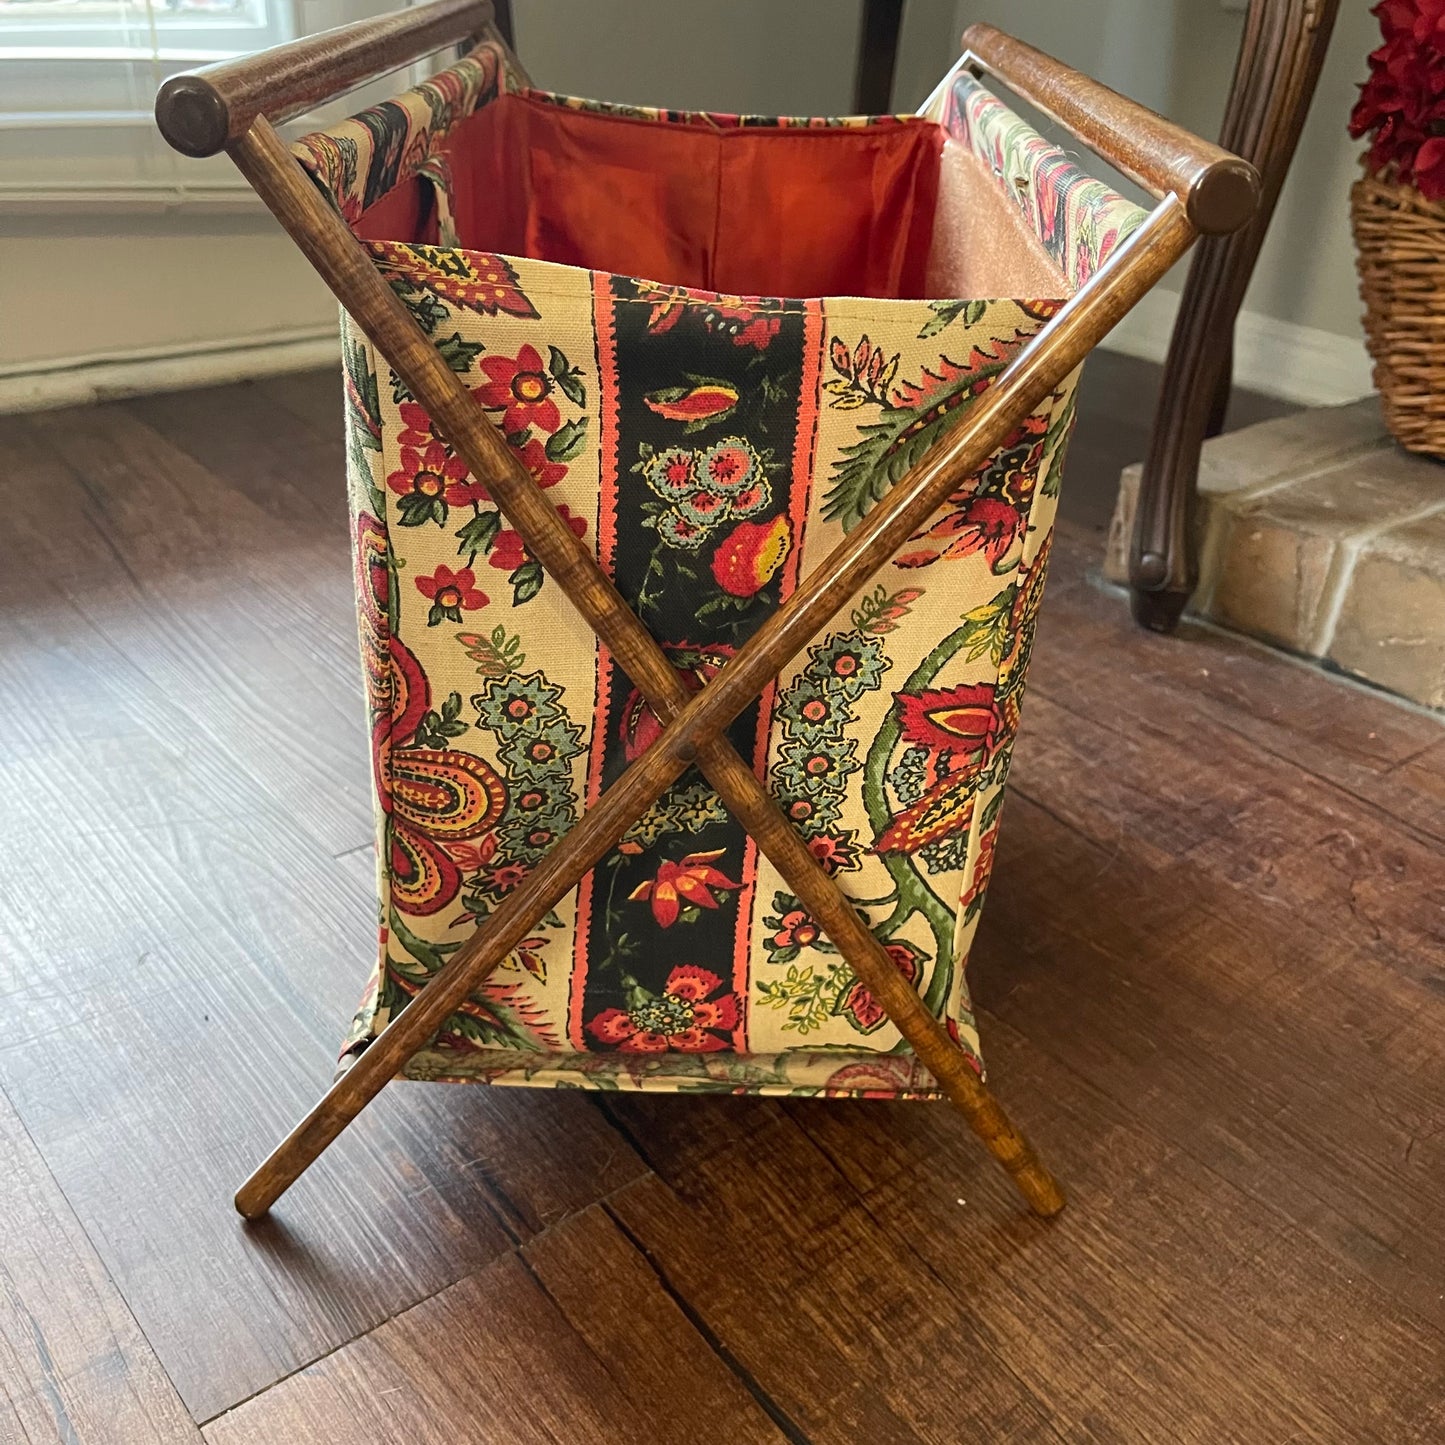 Vintage Knitting Bag with Wooden Stand